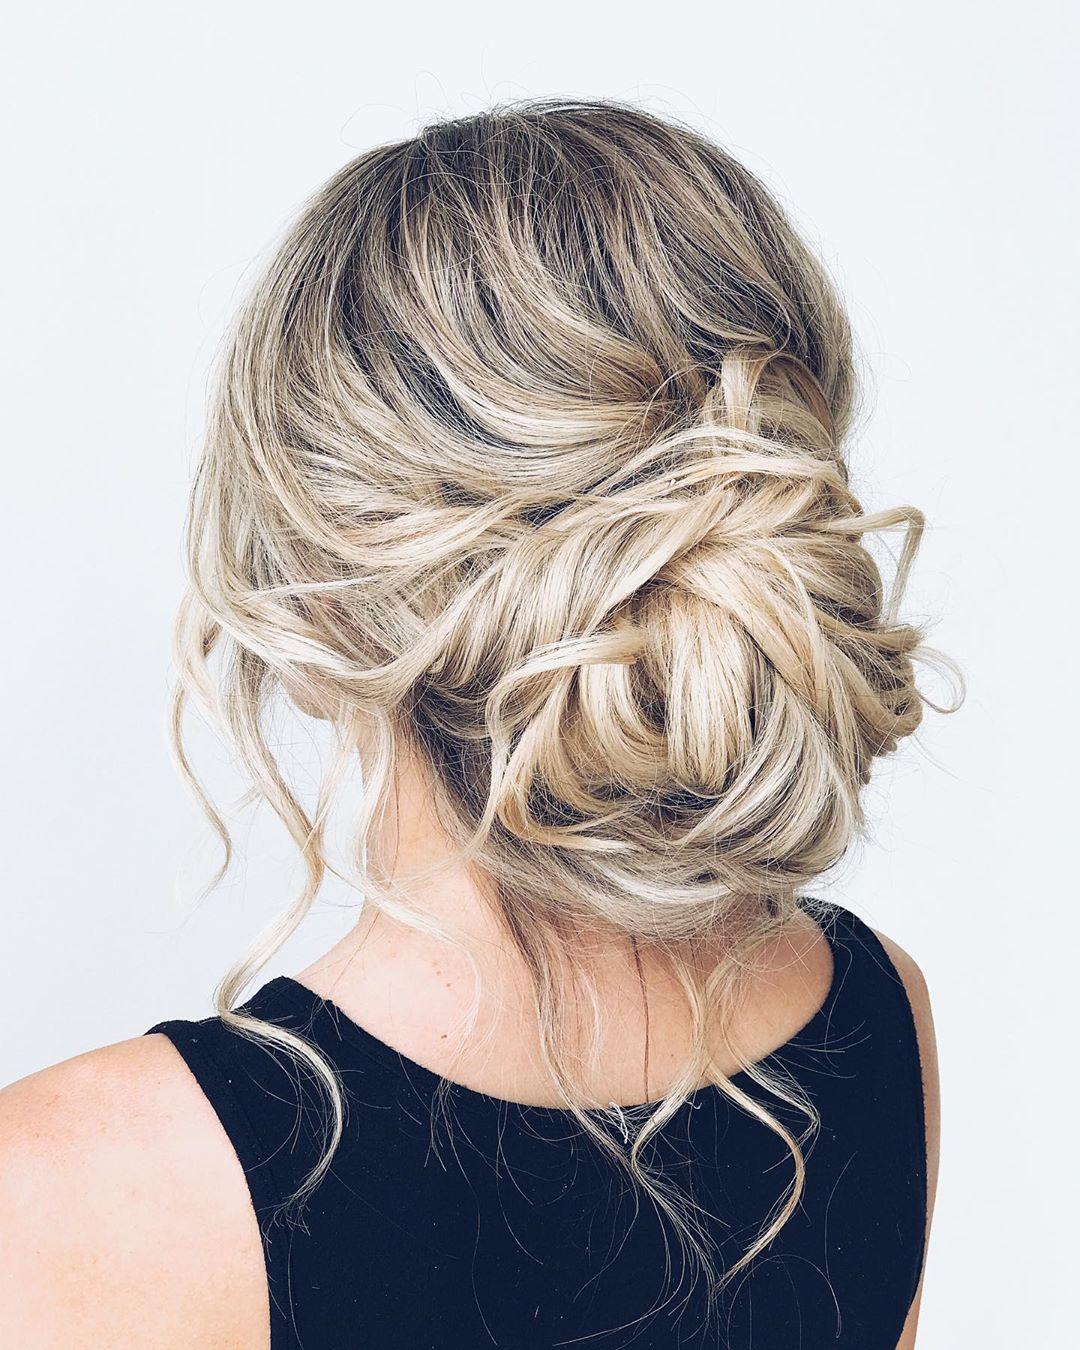 5 Ways To Set Your Hair For Girls' Night | IWMBuzz